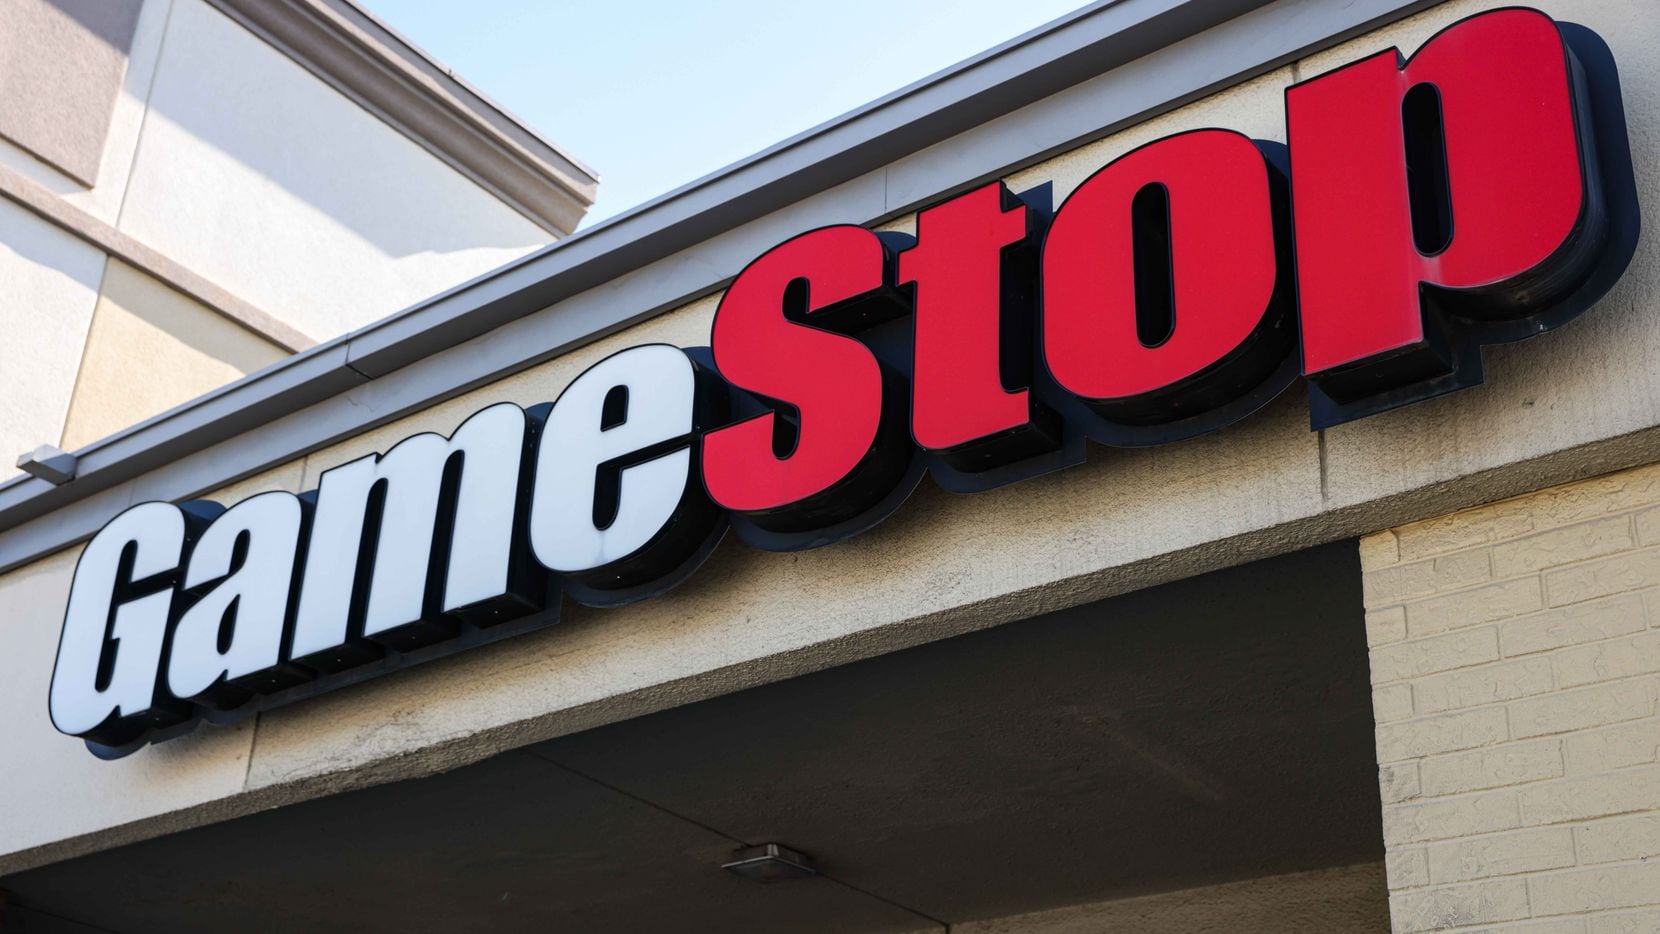 Shares of GameStop rose 7.3% Tuesday to close at $194.46 on news of the new hires.